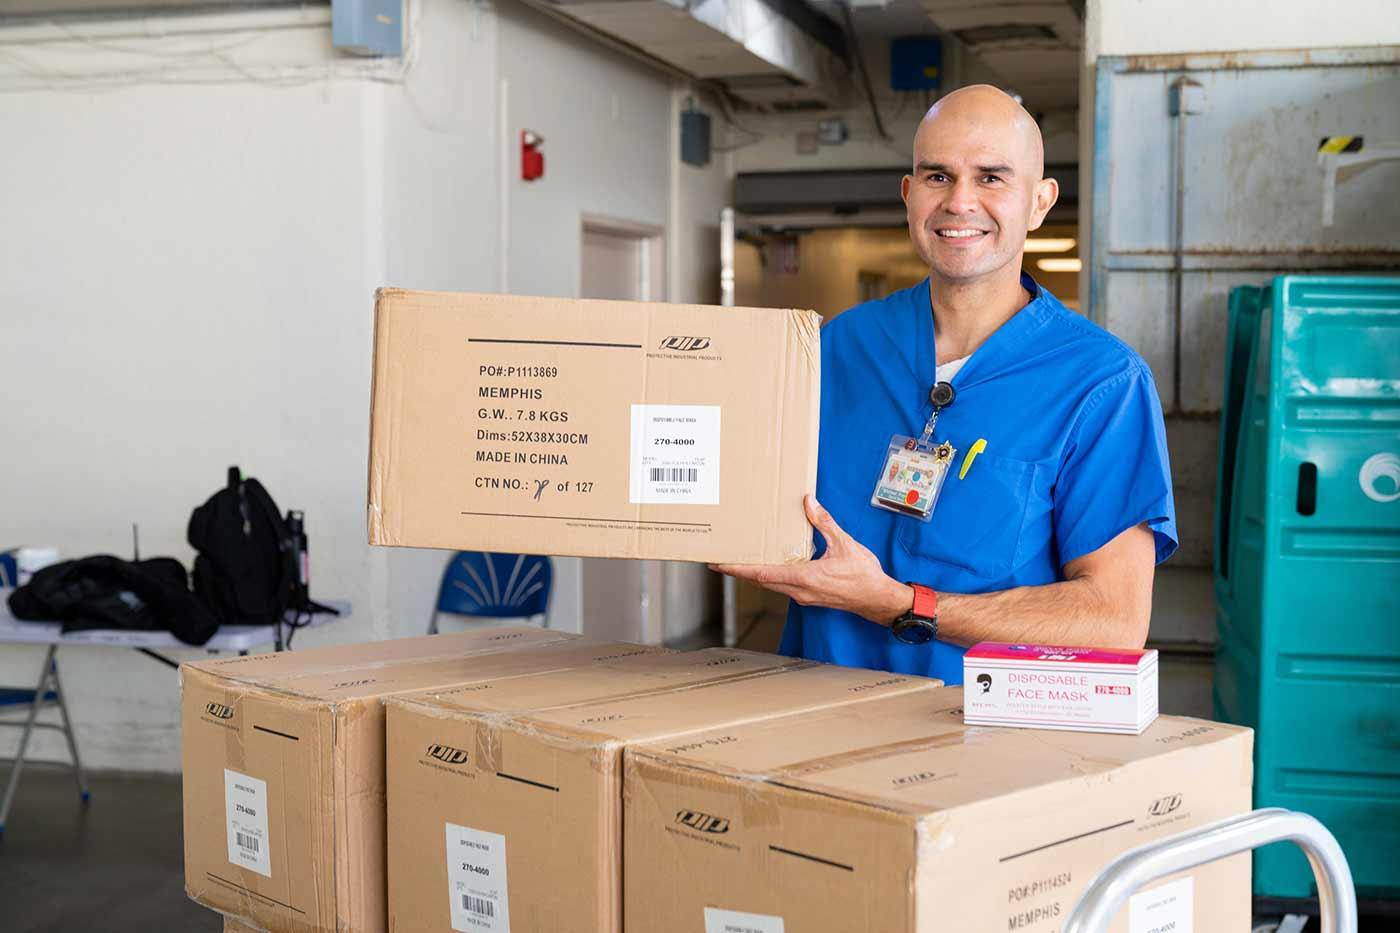 Employee with donation boxes